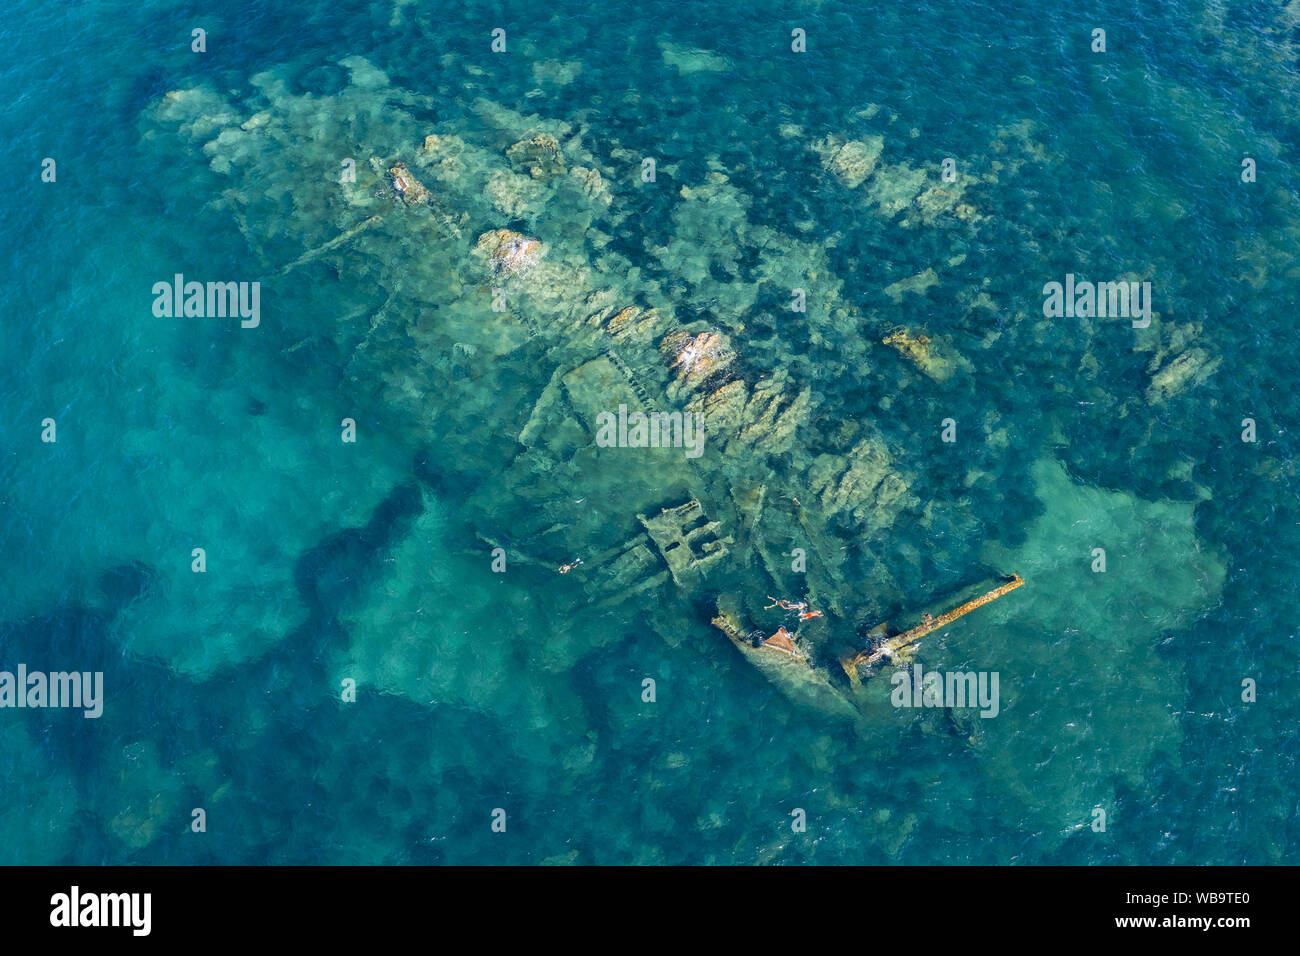 View from above, stunning aerial view of a wreck inside the Marine Protected Area of Tavolara. Some people snorkel in an emerald green sea. Stock Photo